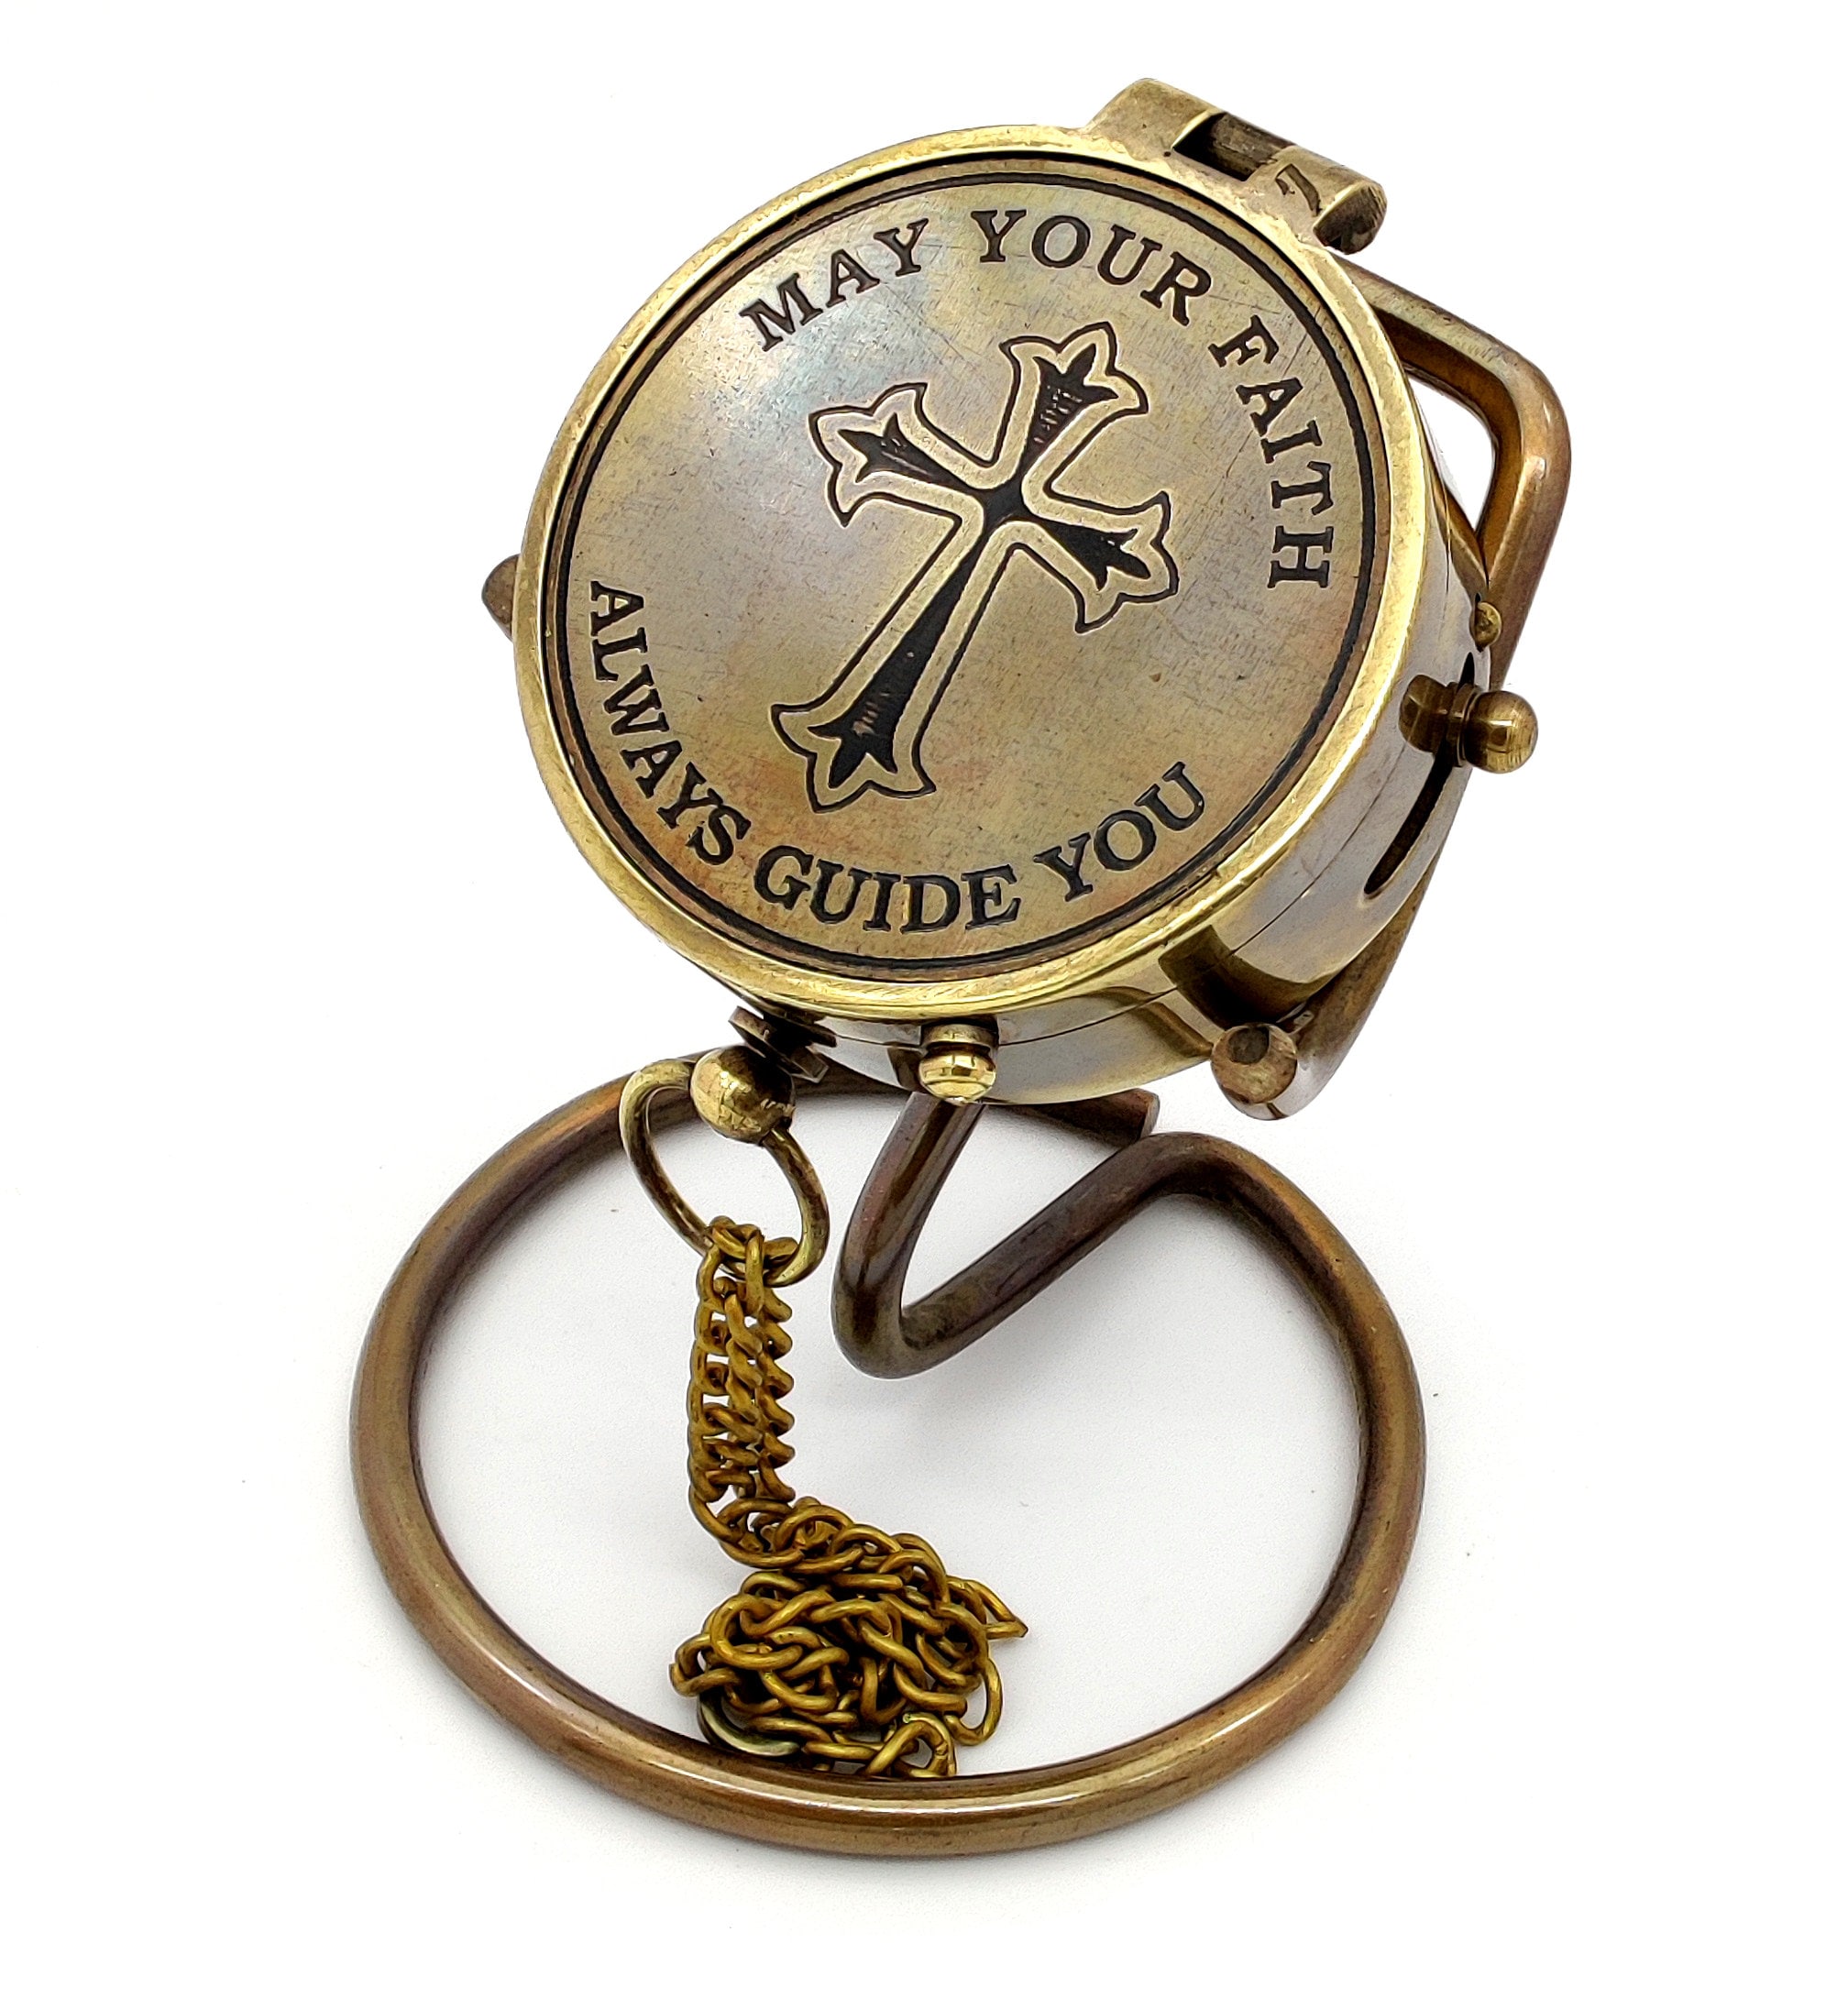 Birthday The Perfect Baptism Gift Missionary or Confirmation Gift Heavenly Gift of Faith God is My Guide Compass with Display Stand-Unique Uplifting 